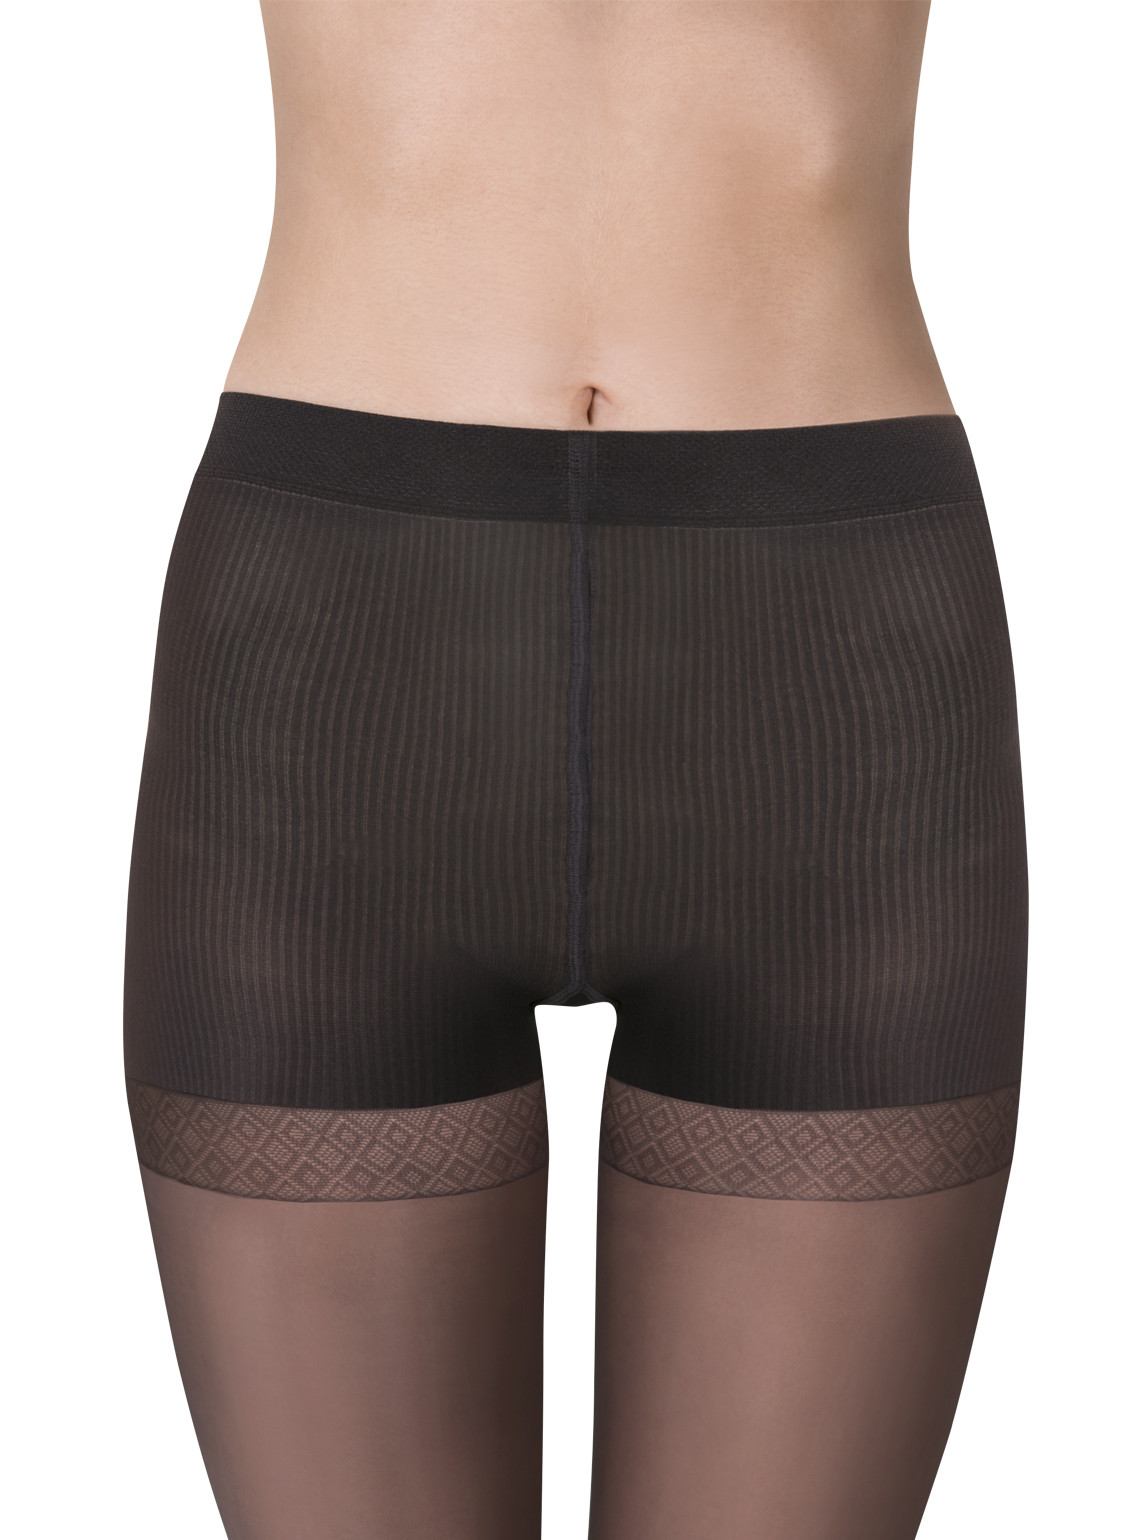 Sheer Graduated Support Tights - 3-6mmHg - Control Top - 20 den